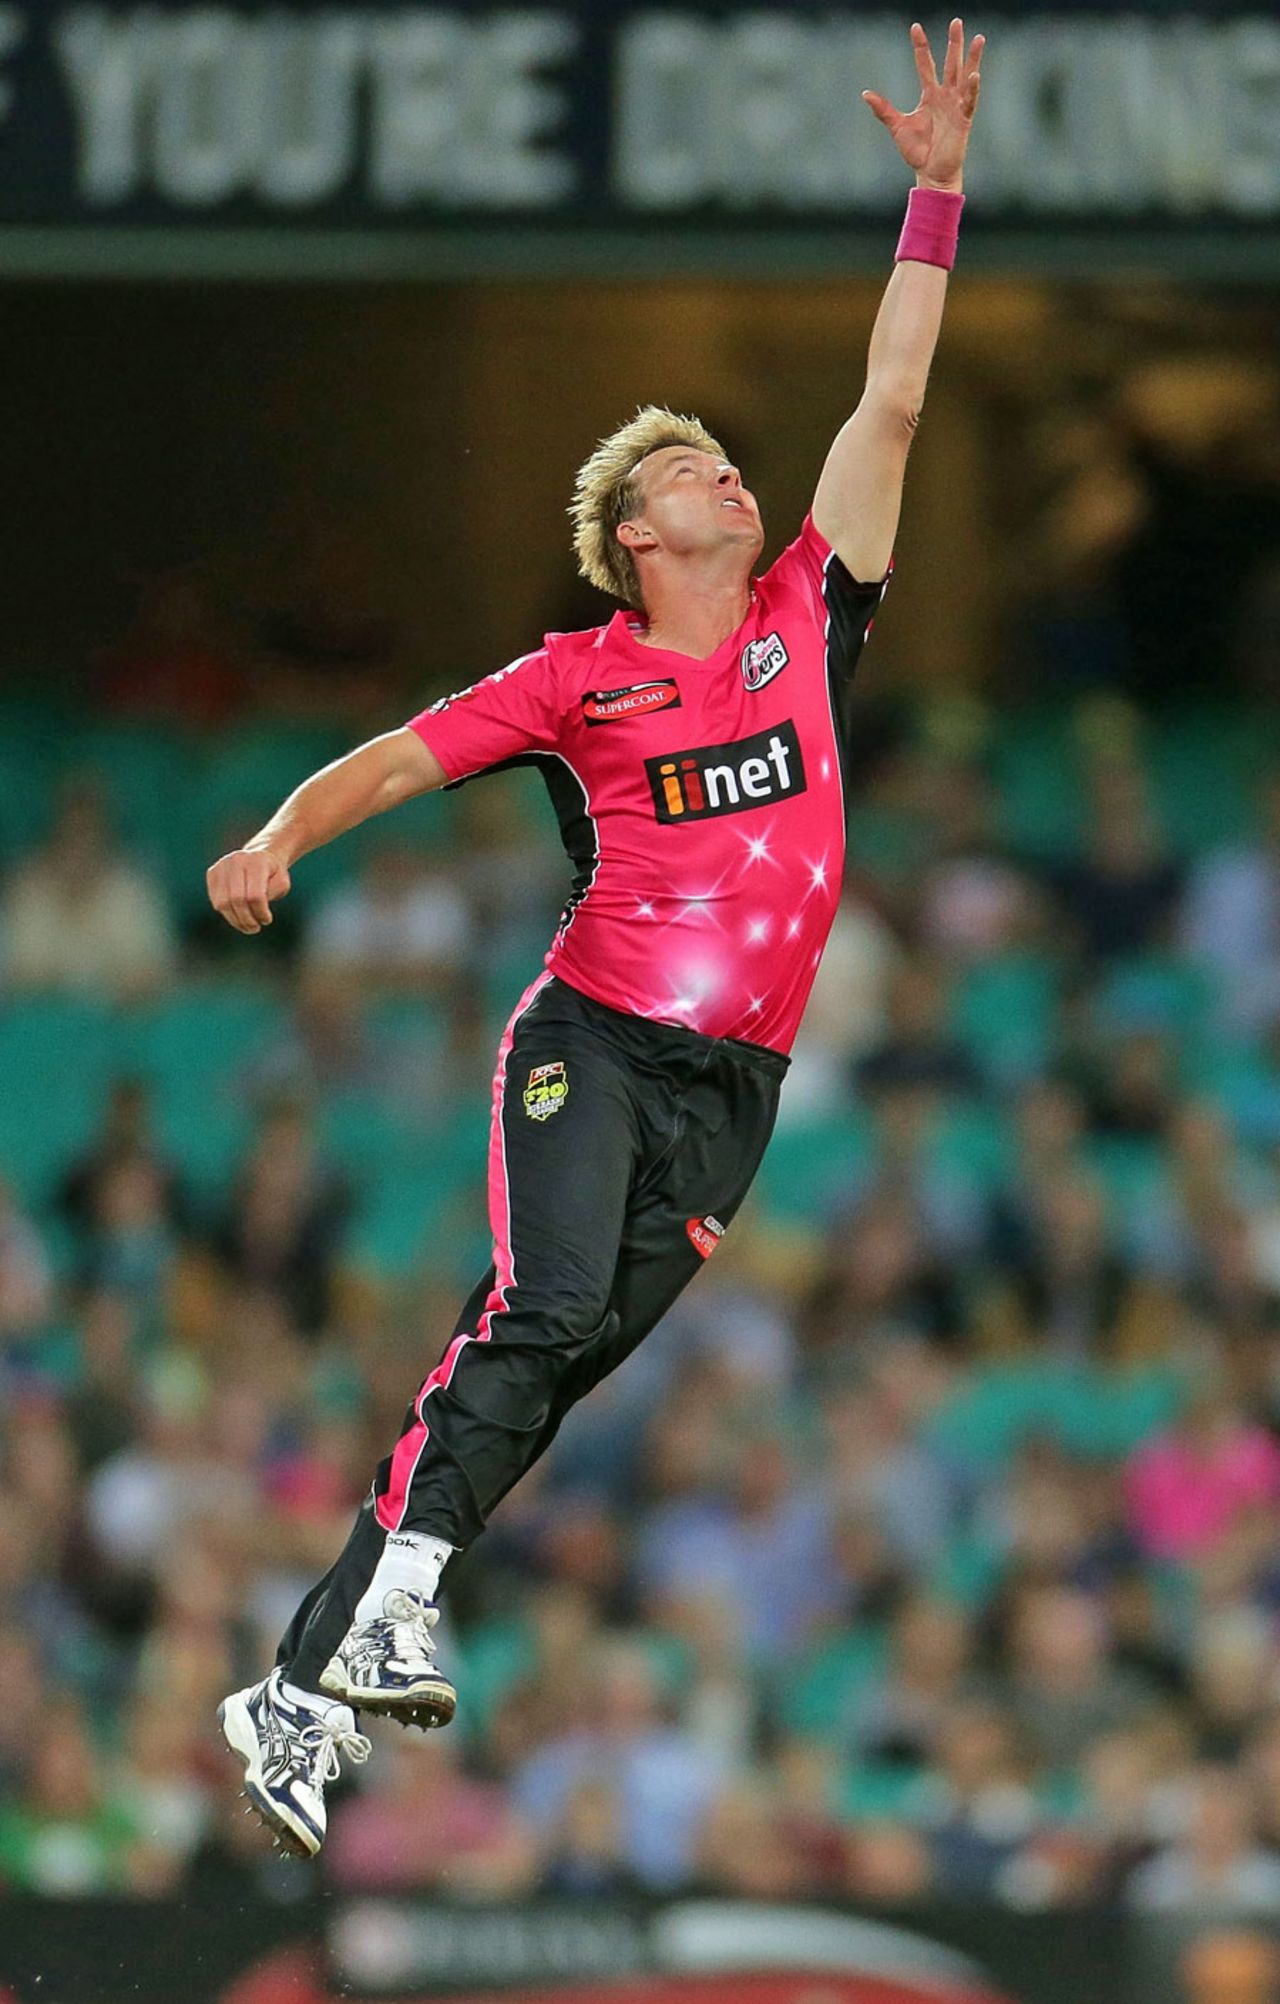 Brett Lee leaps to collect the ball in the field, Sydney Sixers v Melbourne Renegades, Big Bash League 2014-15, Sydney, December 19, 2014 